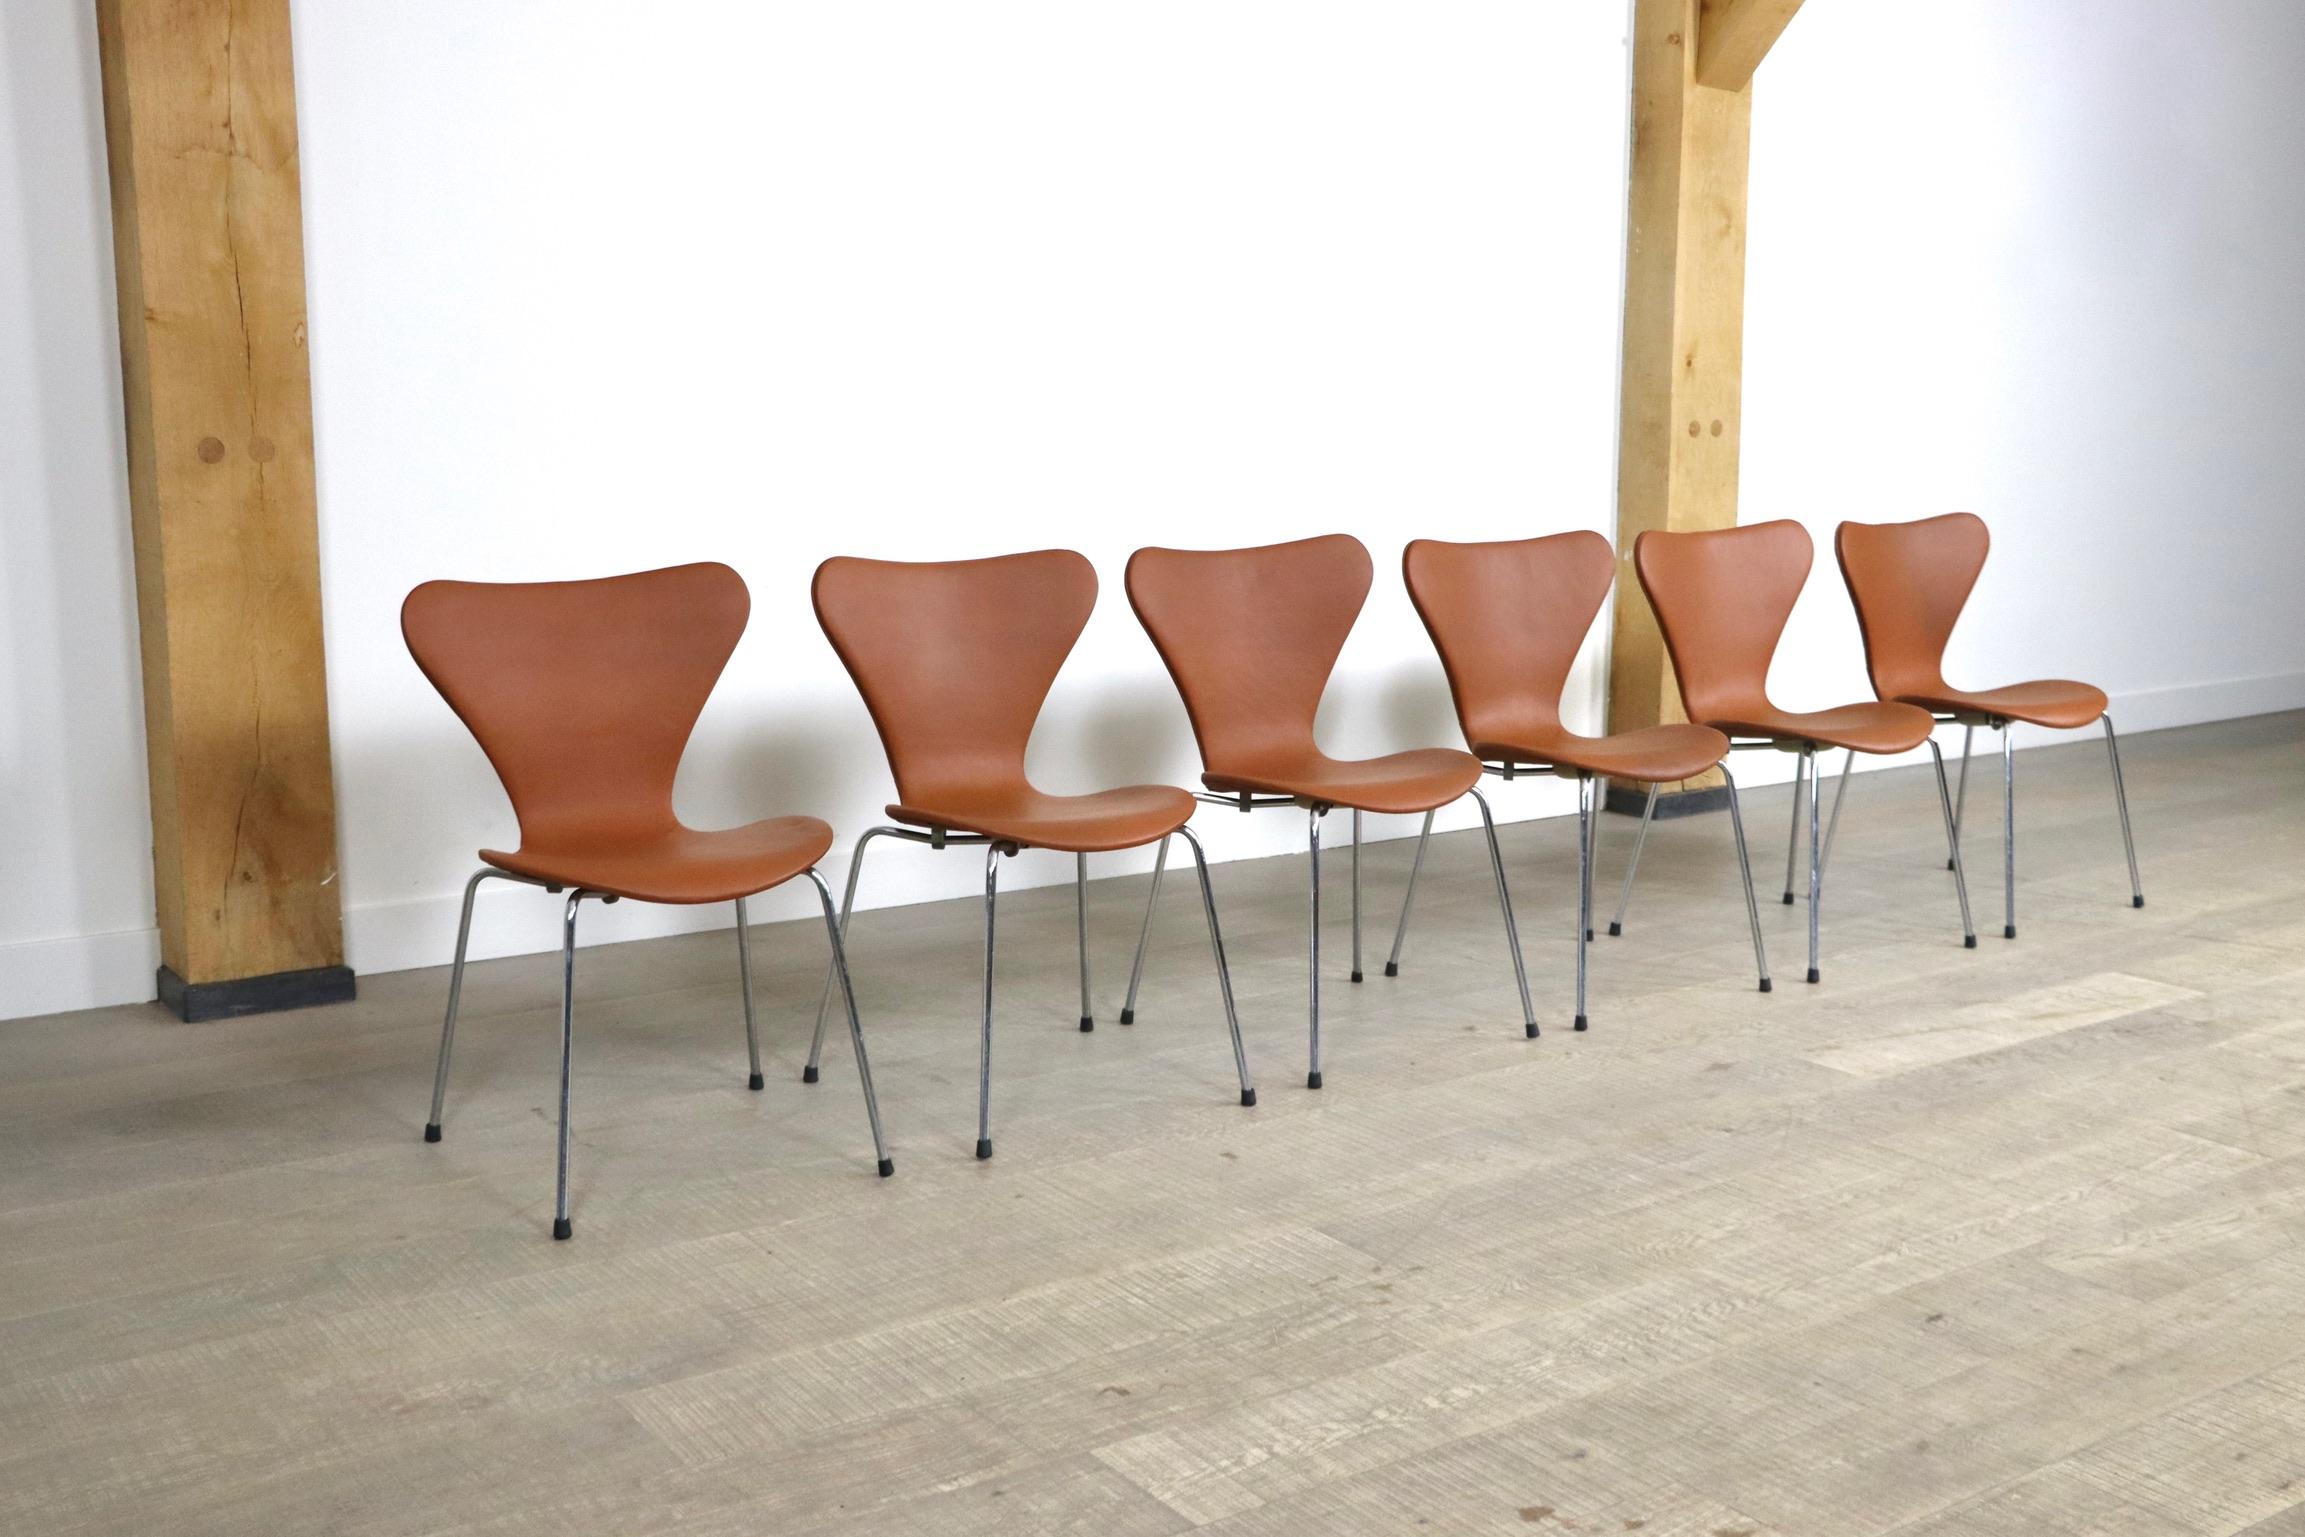 Late 20th Century Set of 6 Butterfly Chairs in Cognac Leather by Arne Jacobsen for Fritz Hansen For Sale